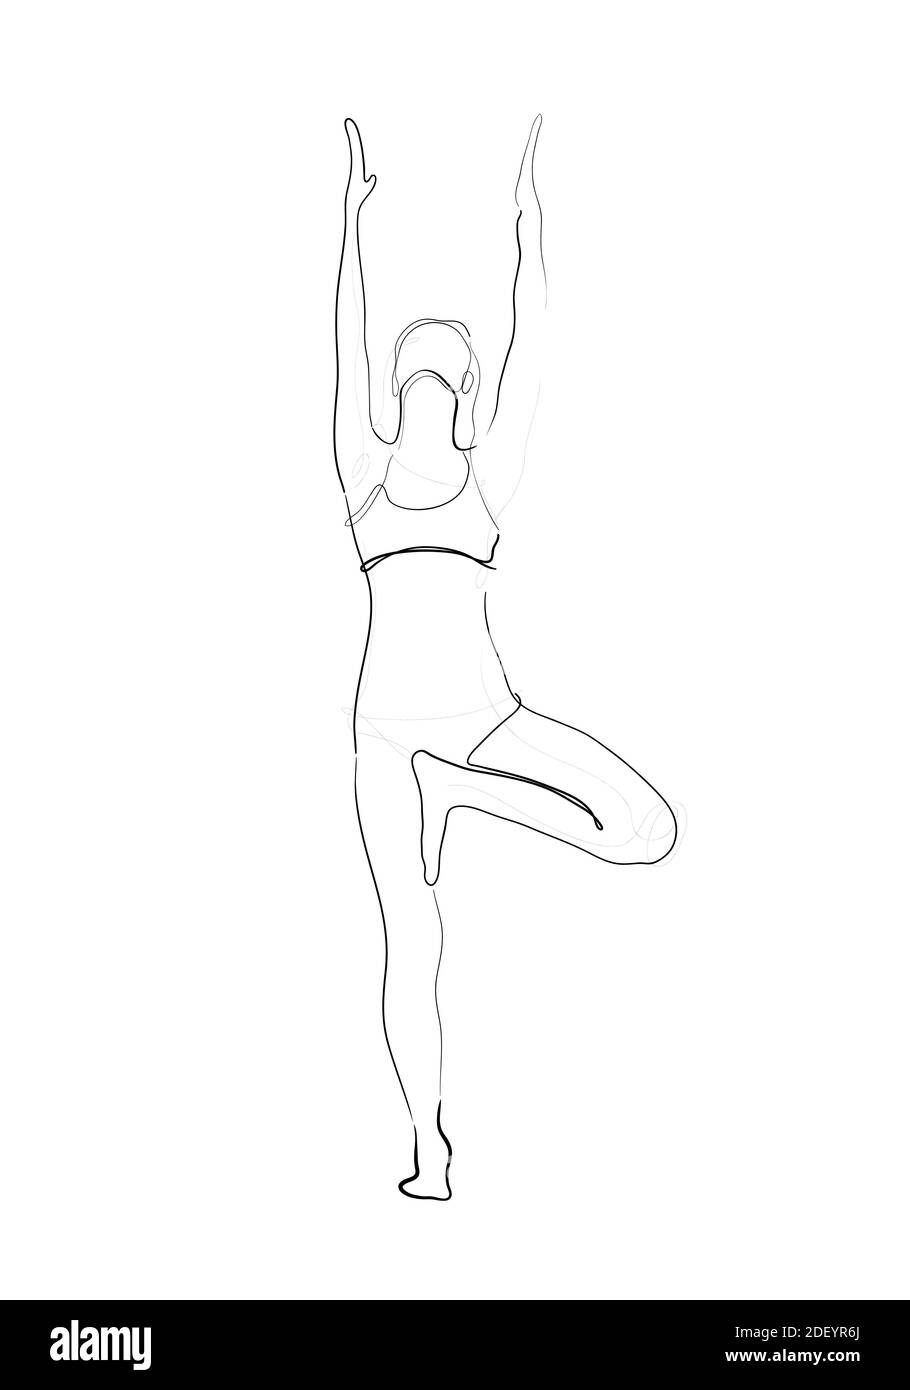 Hand drawn line art illustration of Vrikshasana pose or character woman standing in a tree pose. Stock Photo